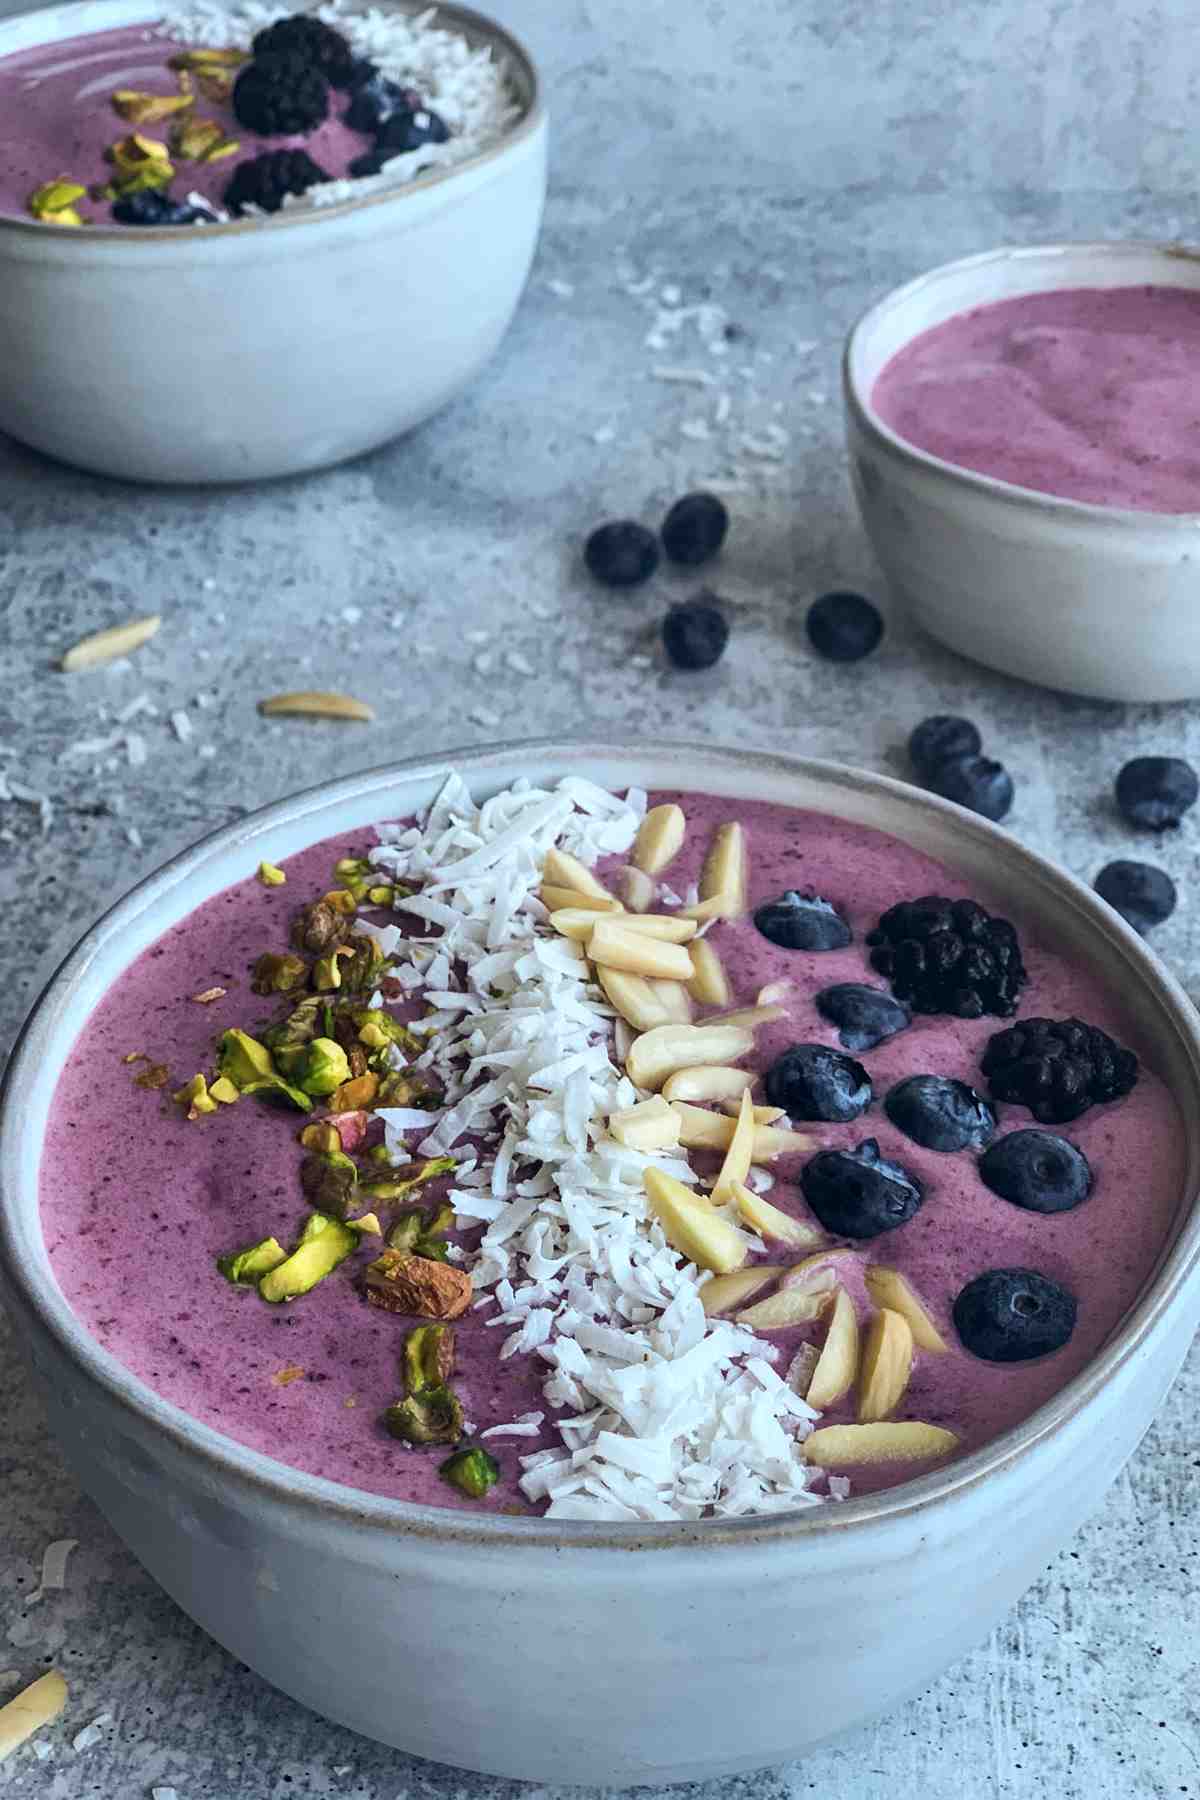 Blackberry smoothie bowl with toppings.